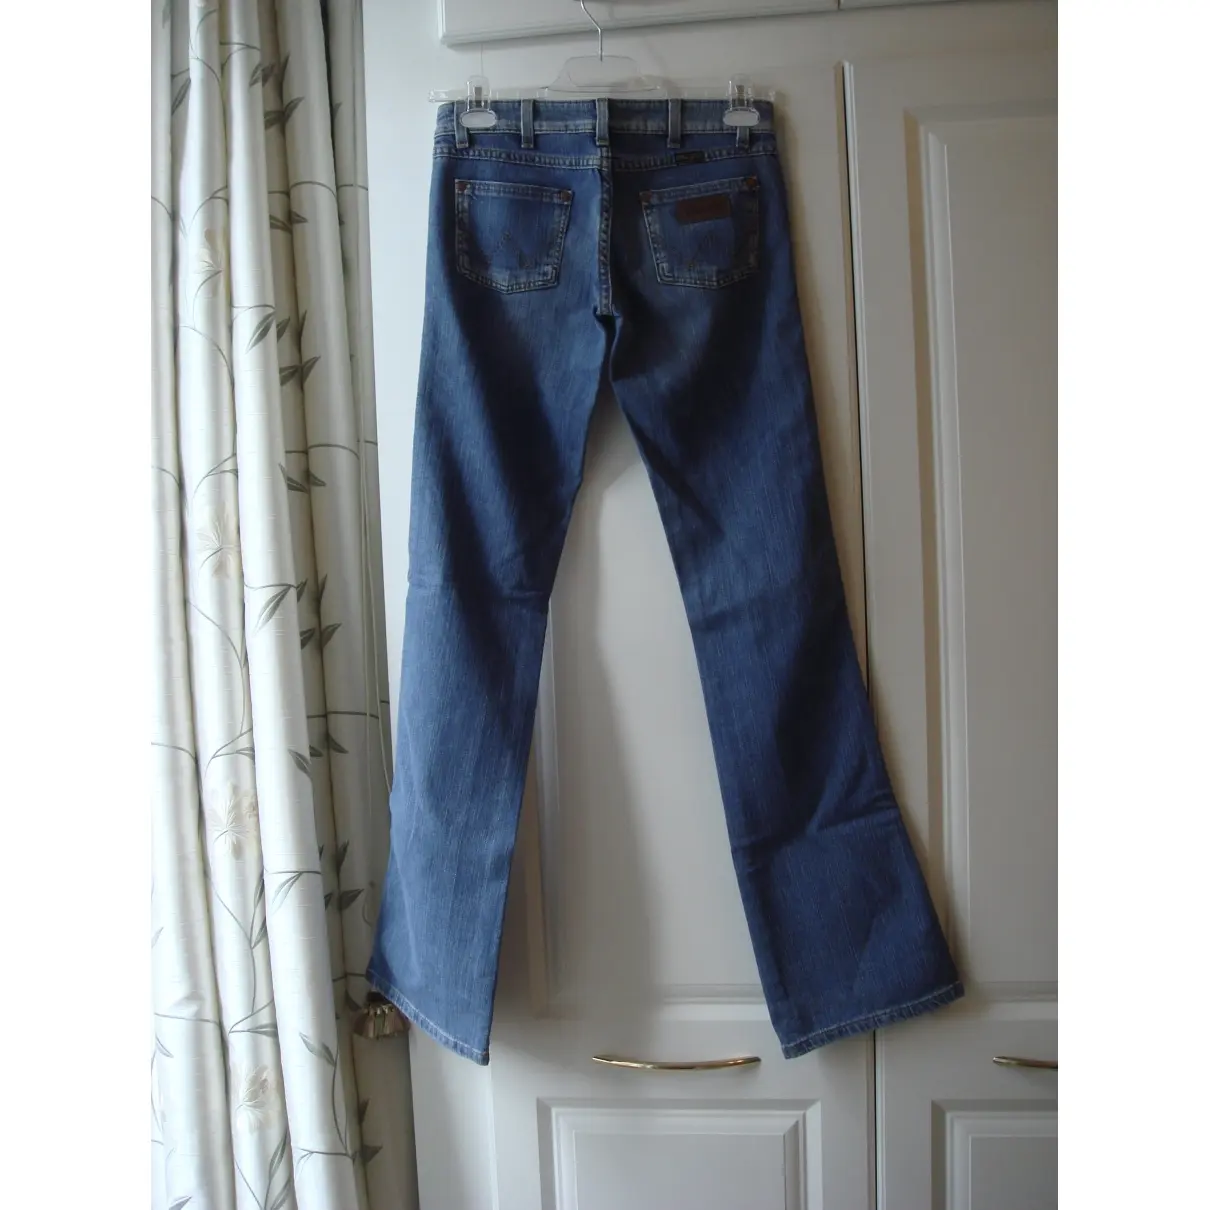 Wrangler Bootcut jeans for sale